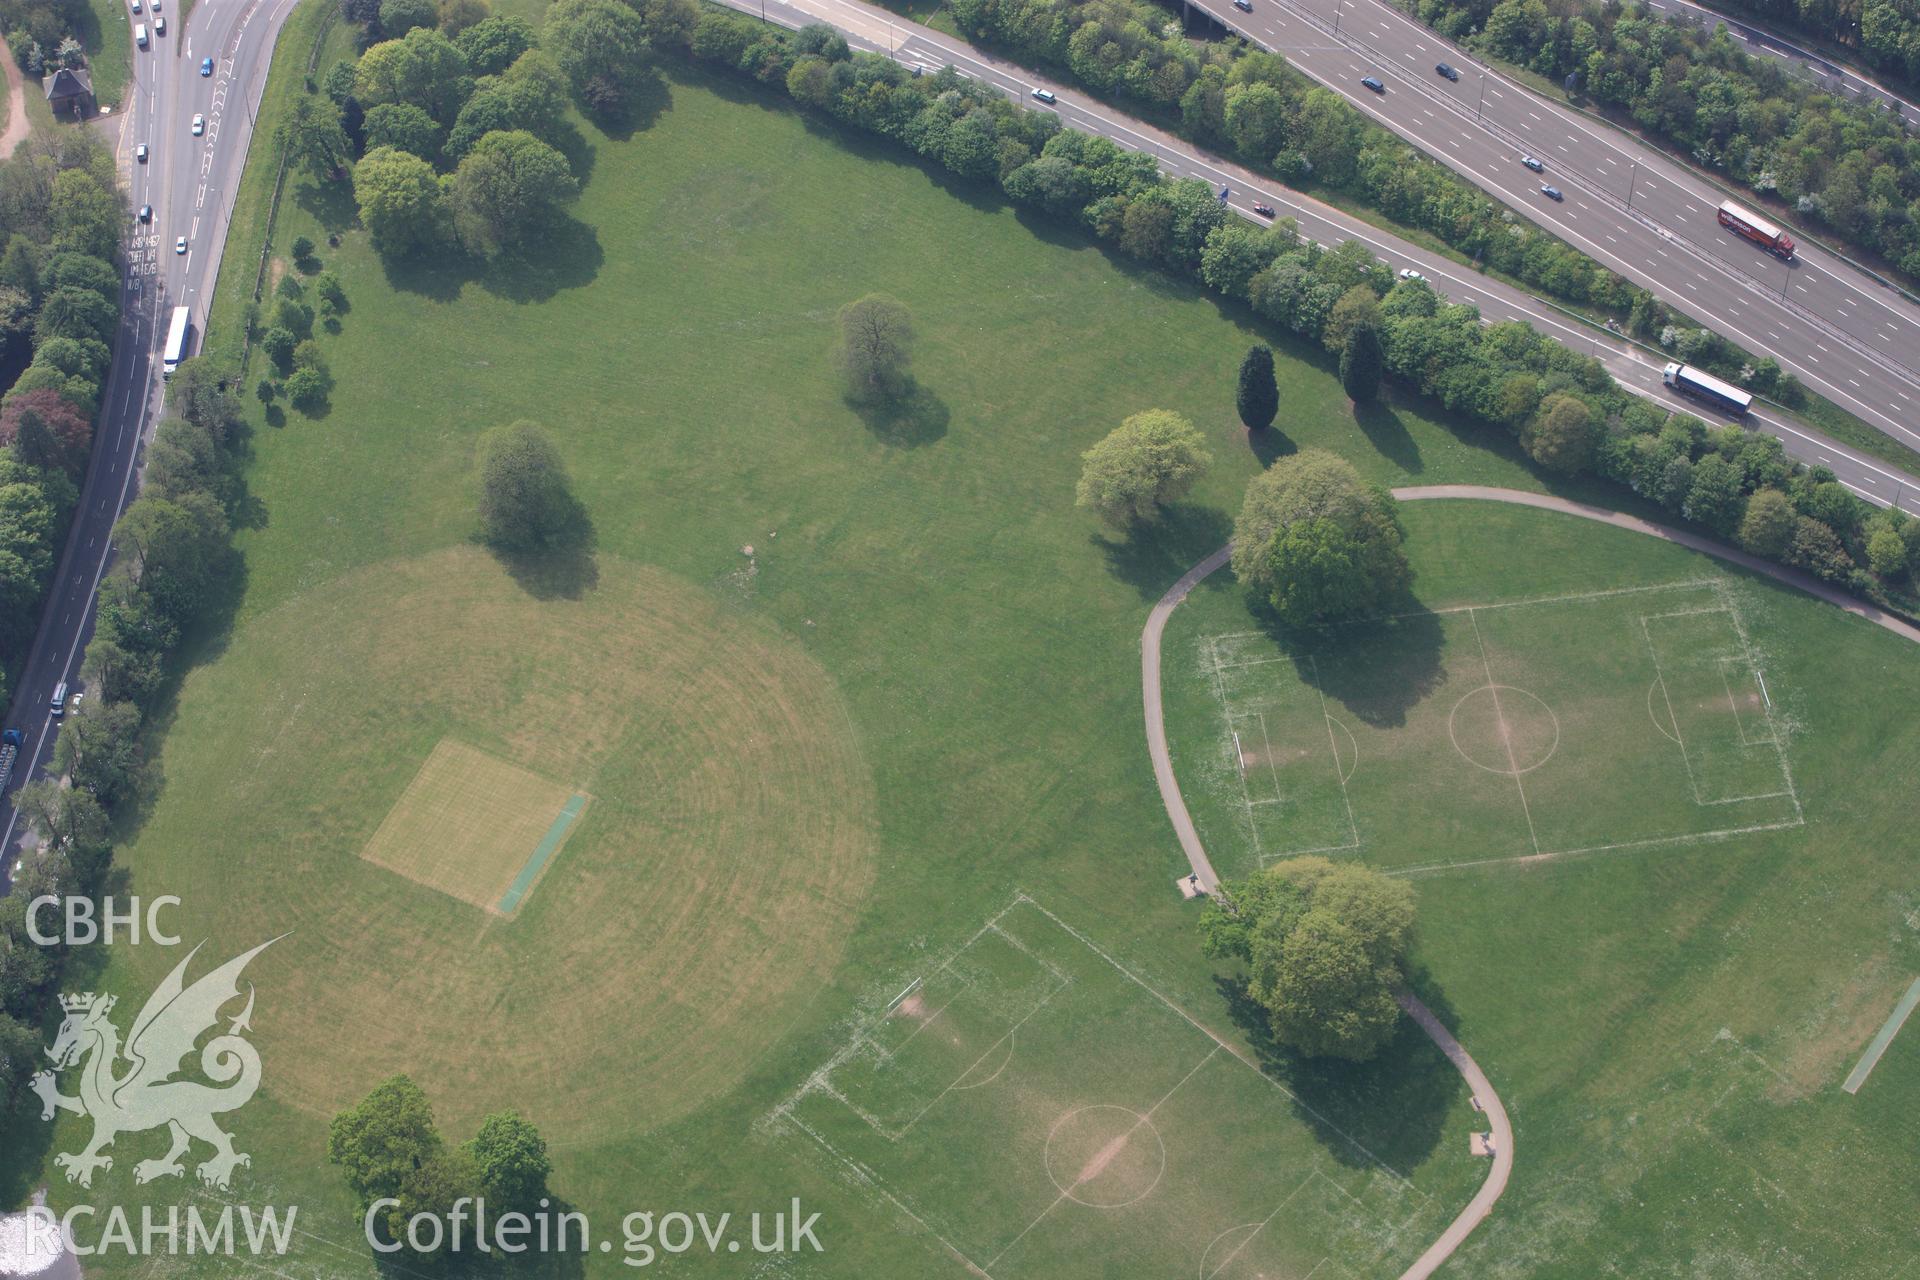 RCAHMW colour oblique photograph of Tredegar, sports fields with non-archaeological parch marks. Taken by Toby Driver on 26/04/2011.